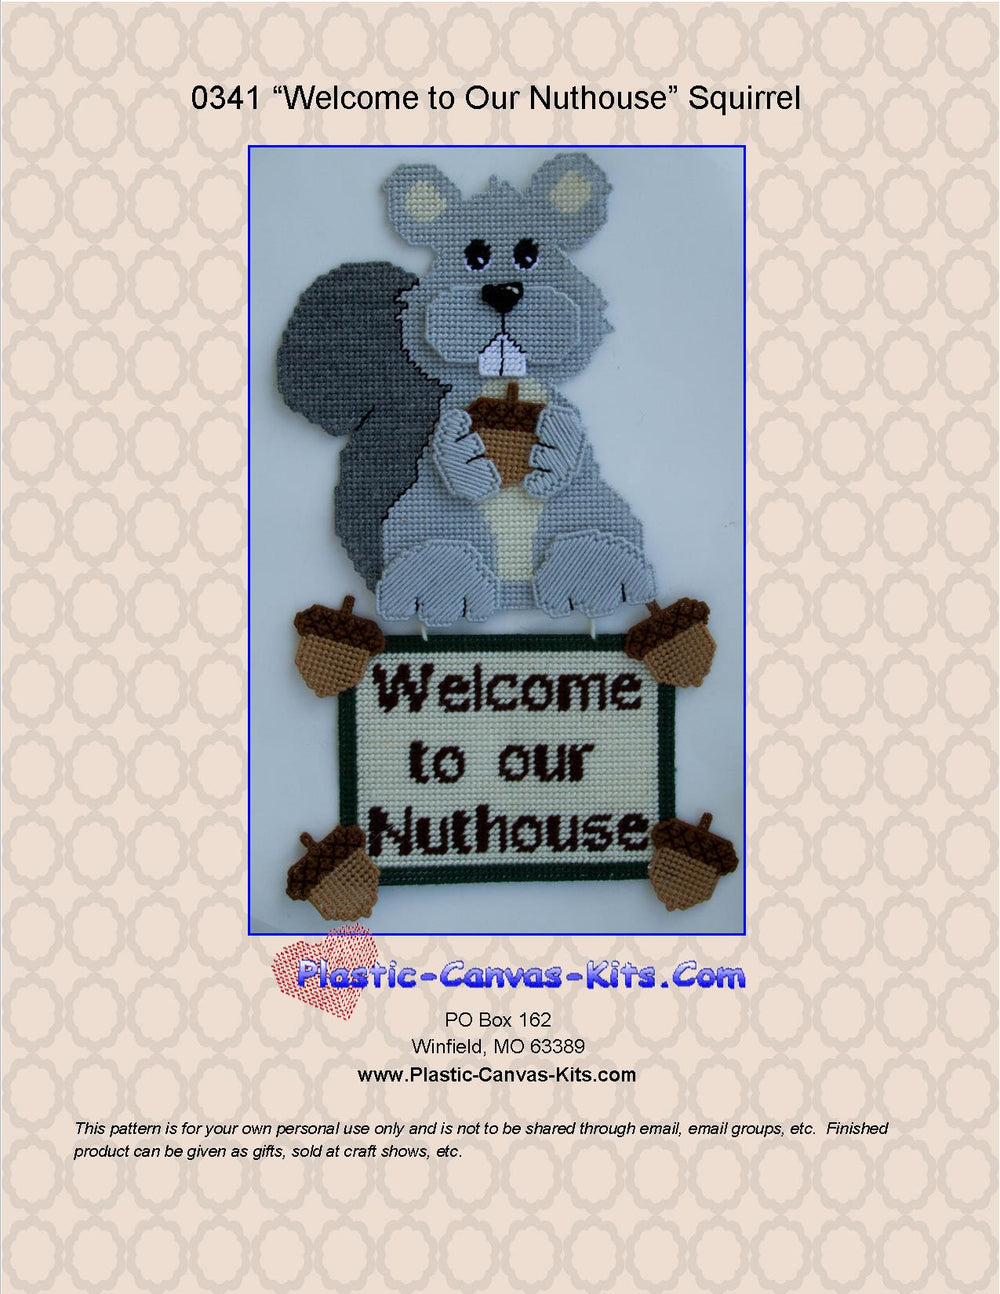 Welcome to our Nuthouse Squirrel